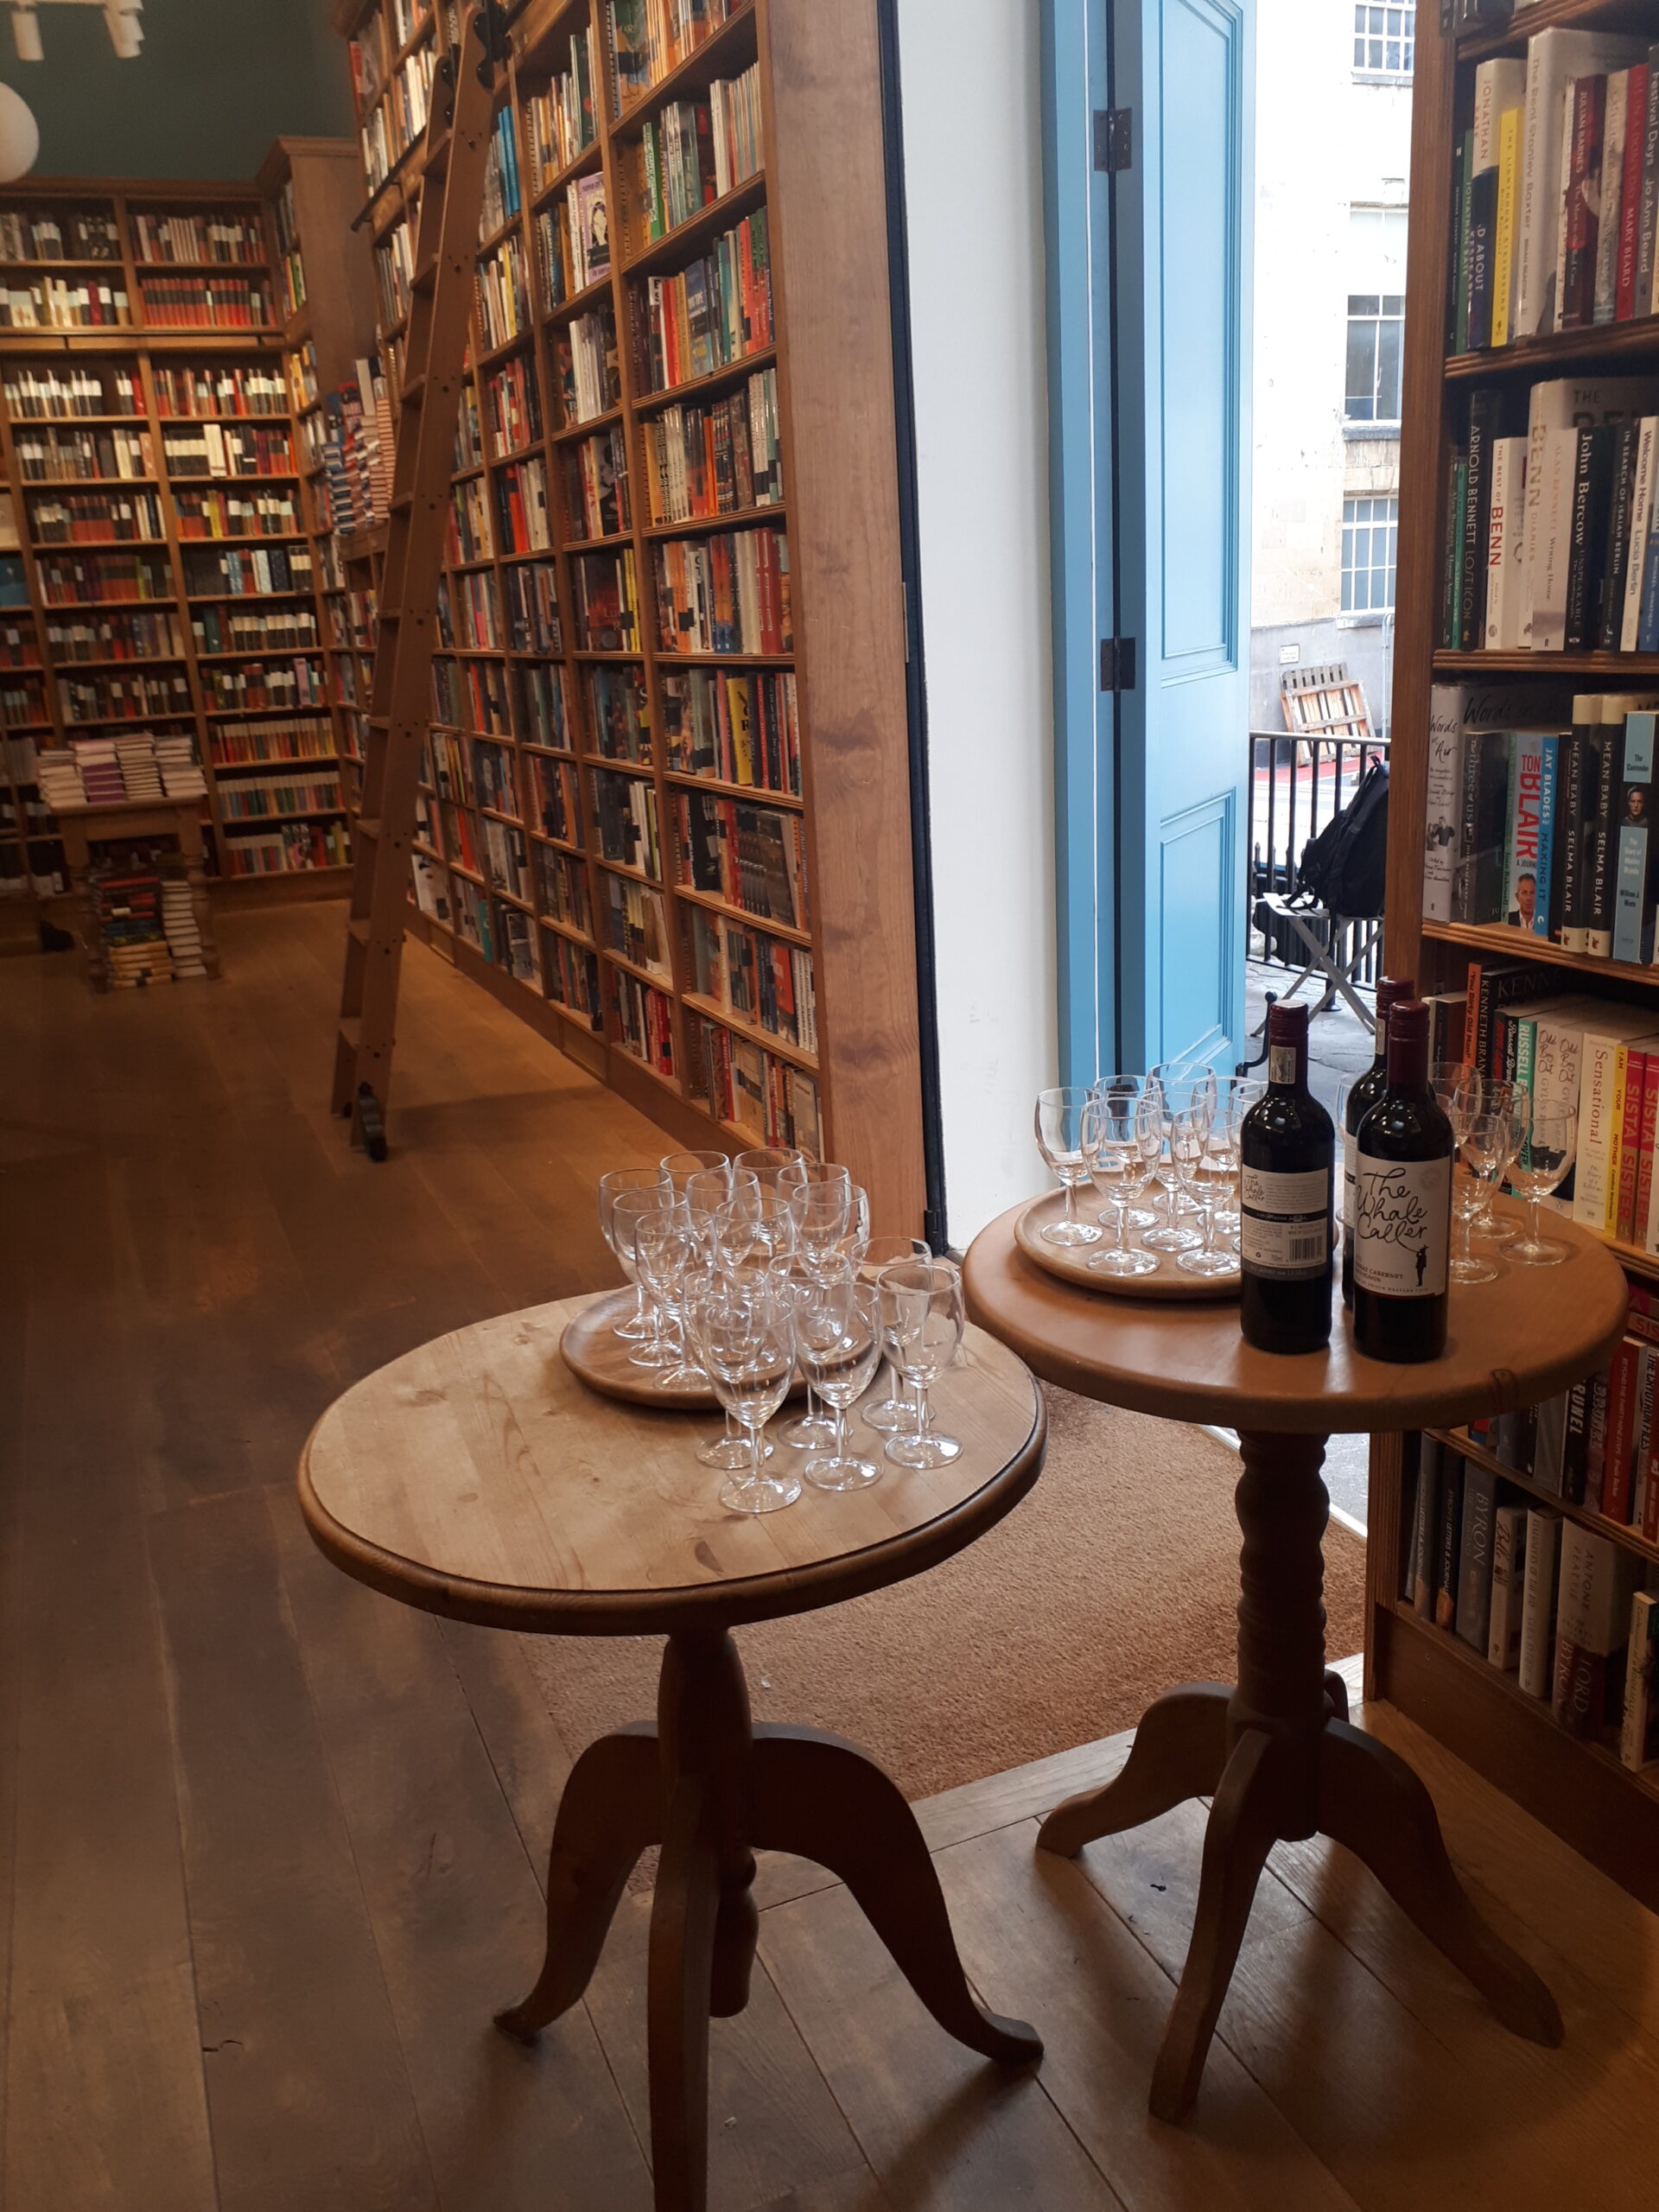 Slightly Foxed Autumn Launch Party | Toppings & Company Booksellers, Bath